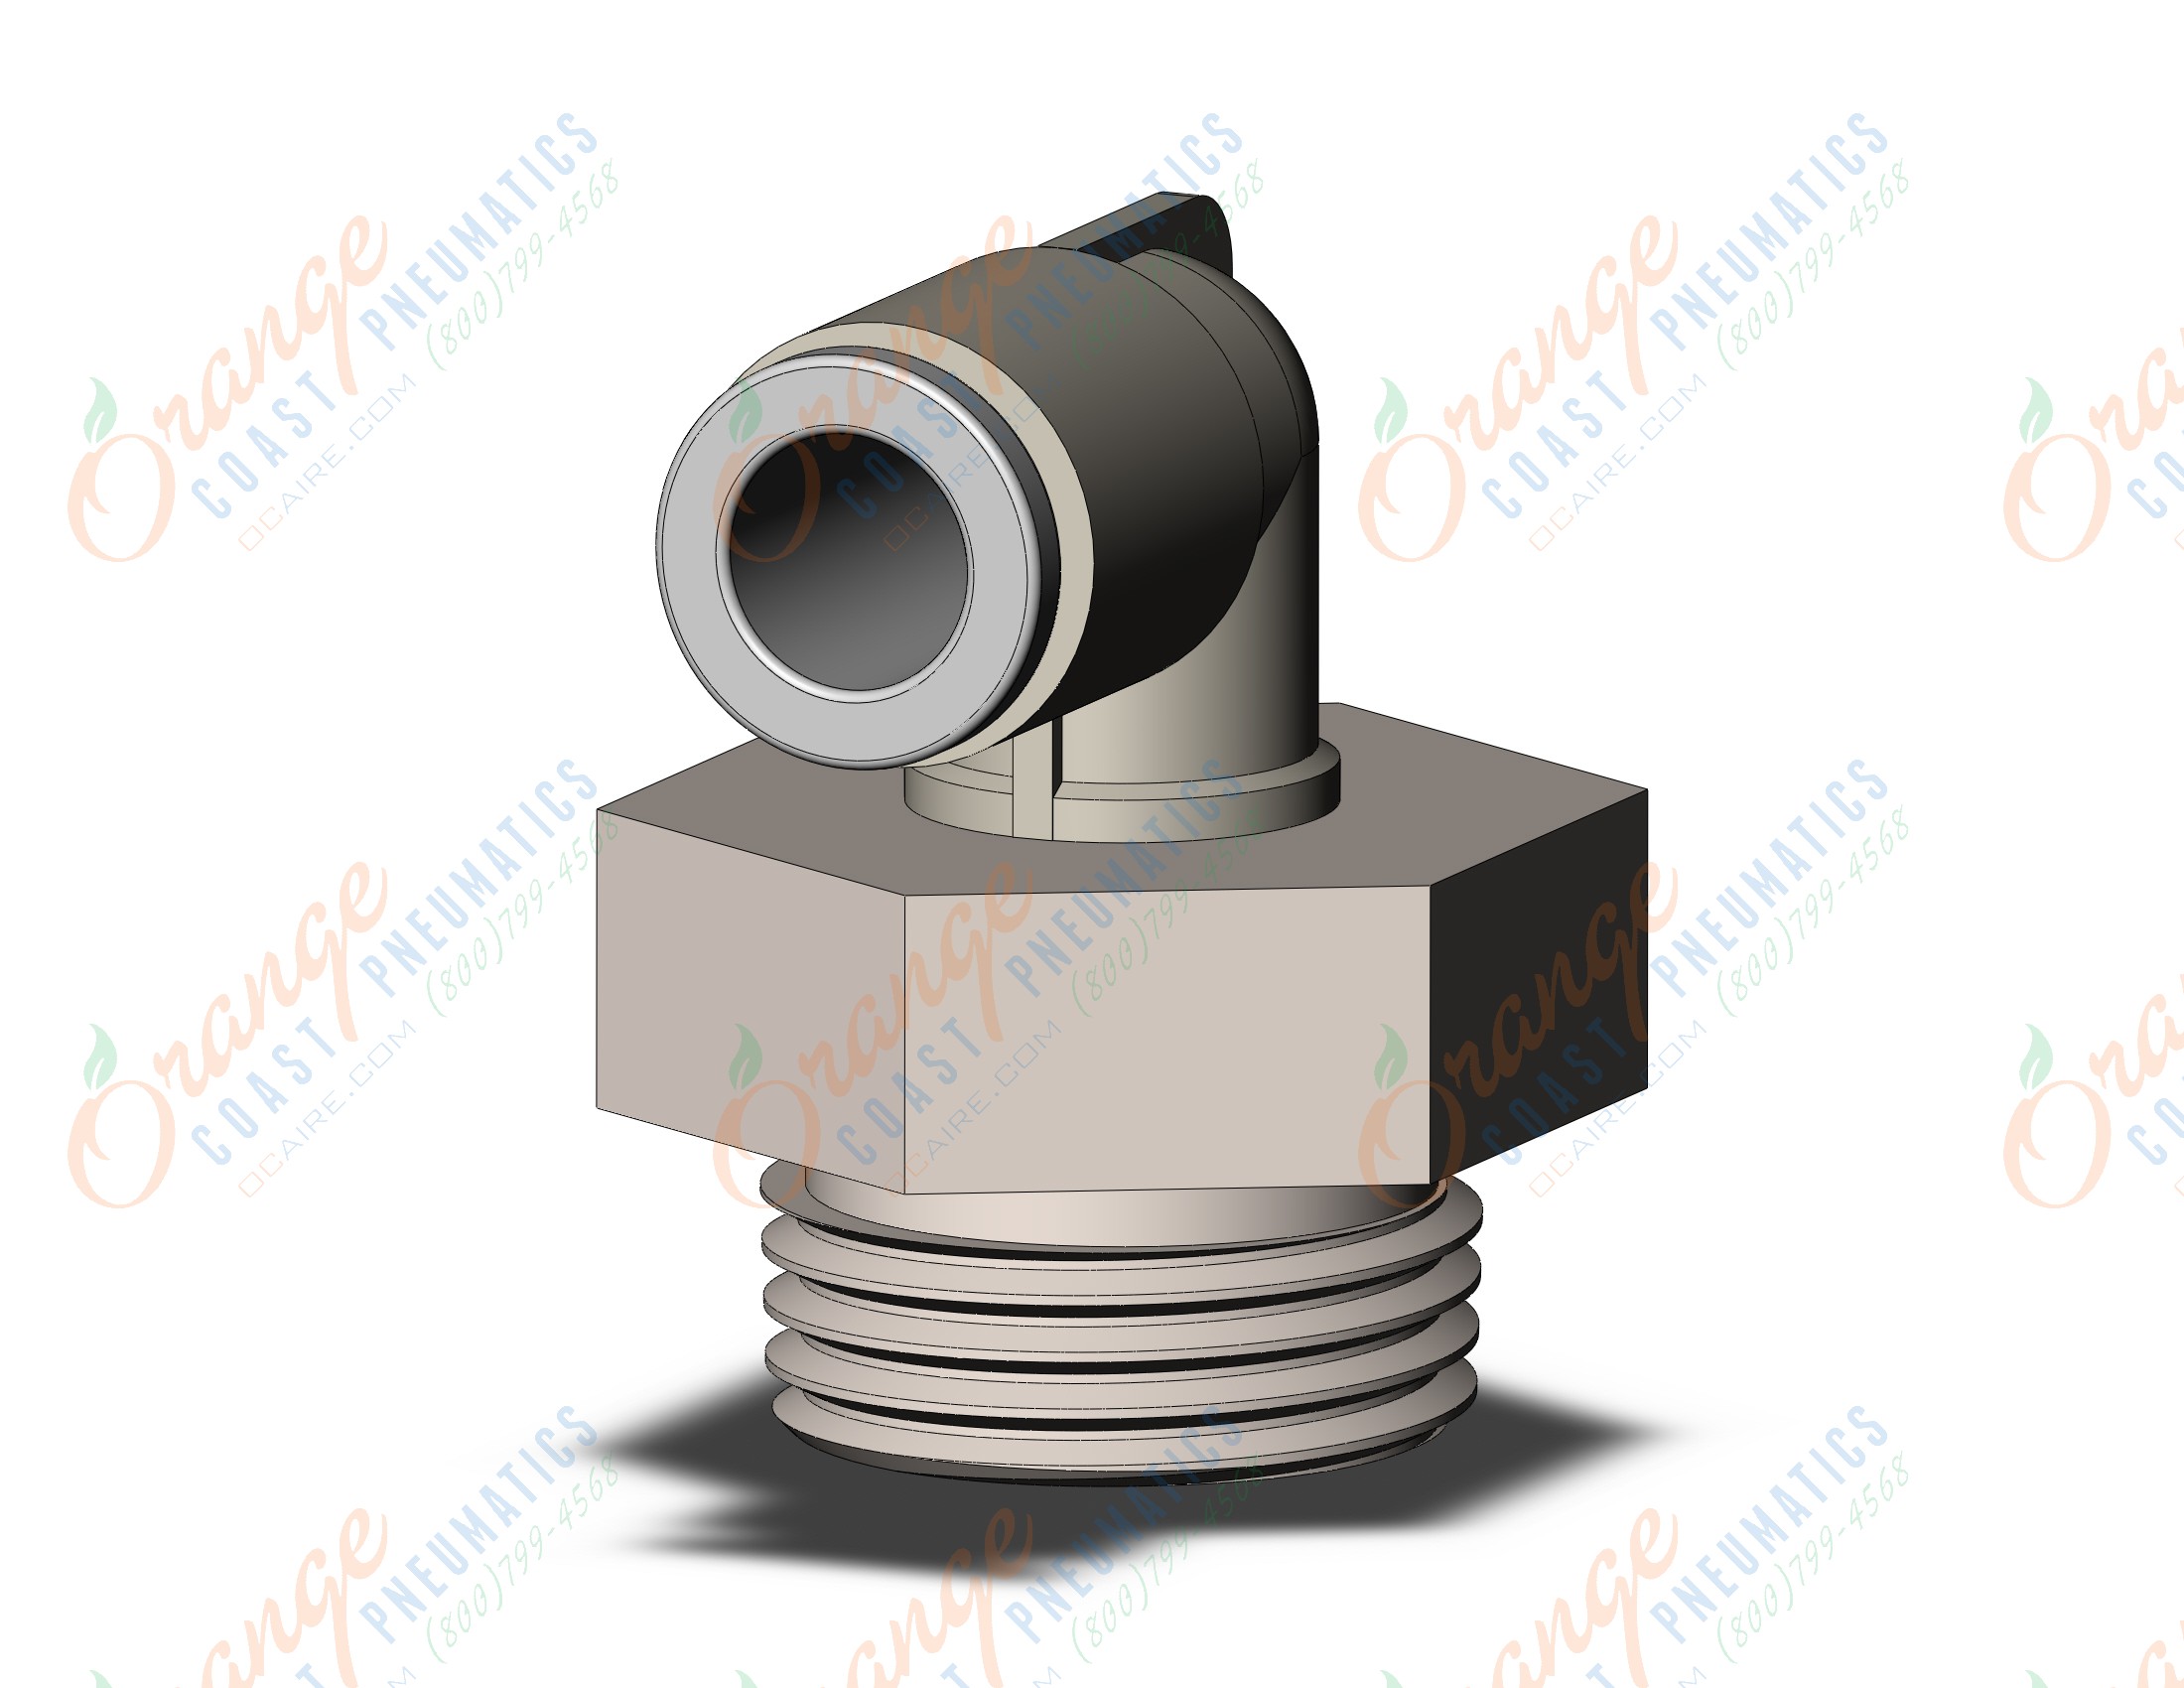 SMC KQ2L06-03NP fitting, male elbow, KQ2 FITTING (sold in packages of 10; price is per piece)